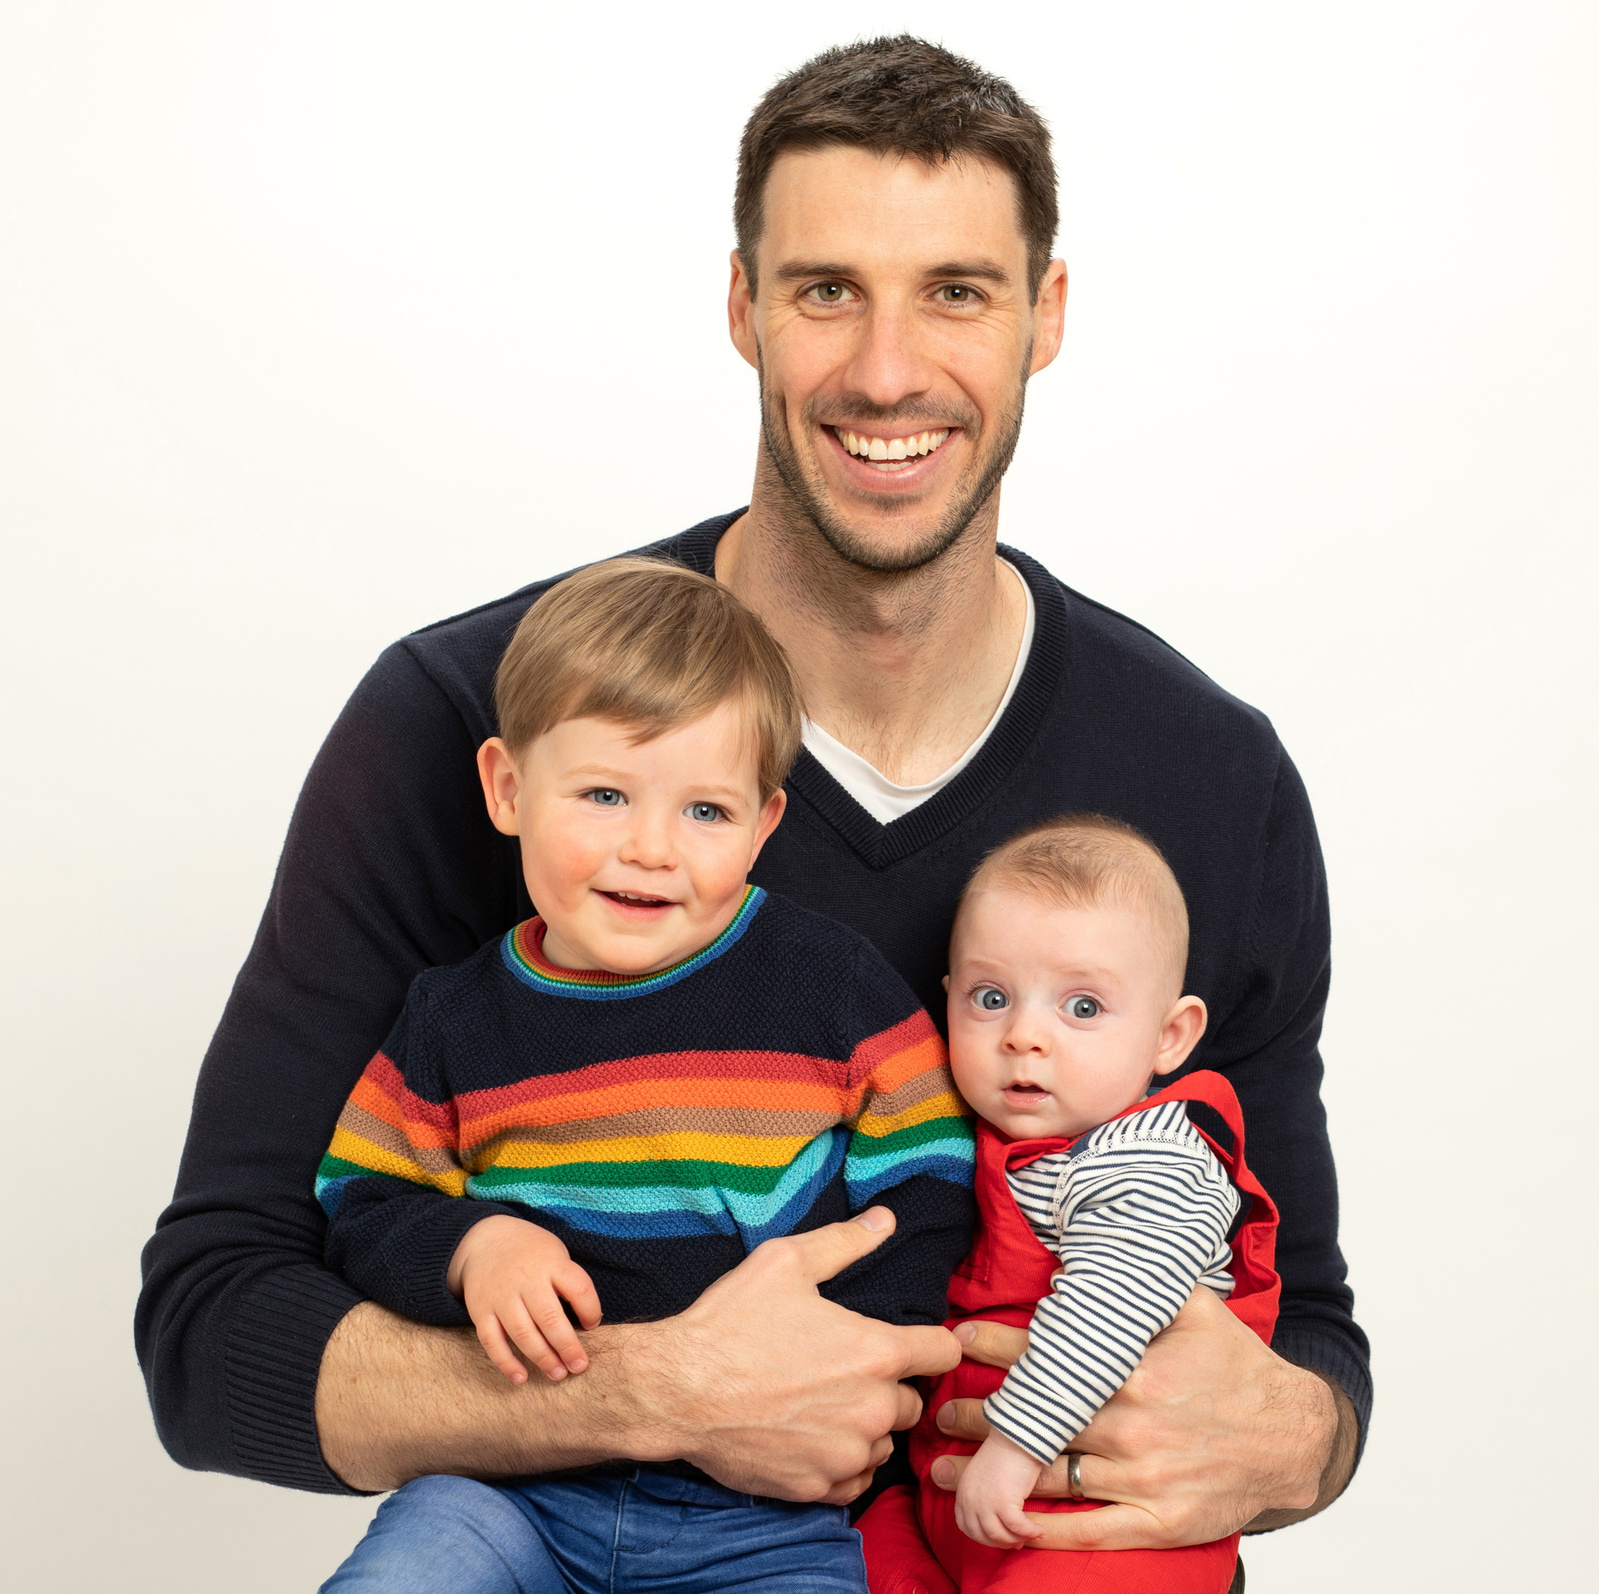 Classic portrait of a young Dad and his two small children photographed in a professional family photography studio in Dublin white background